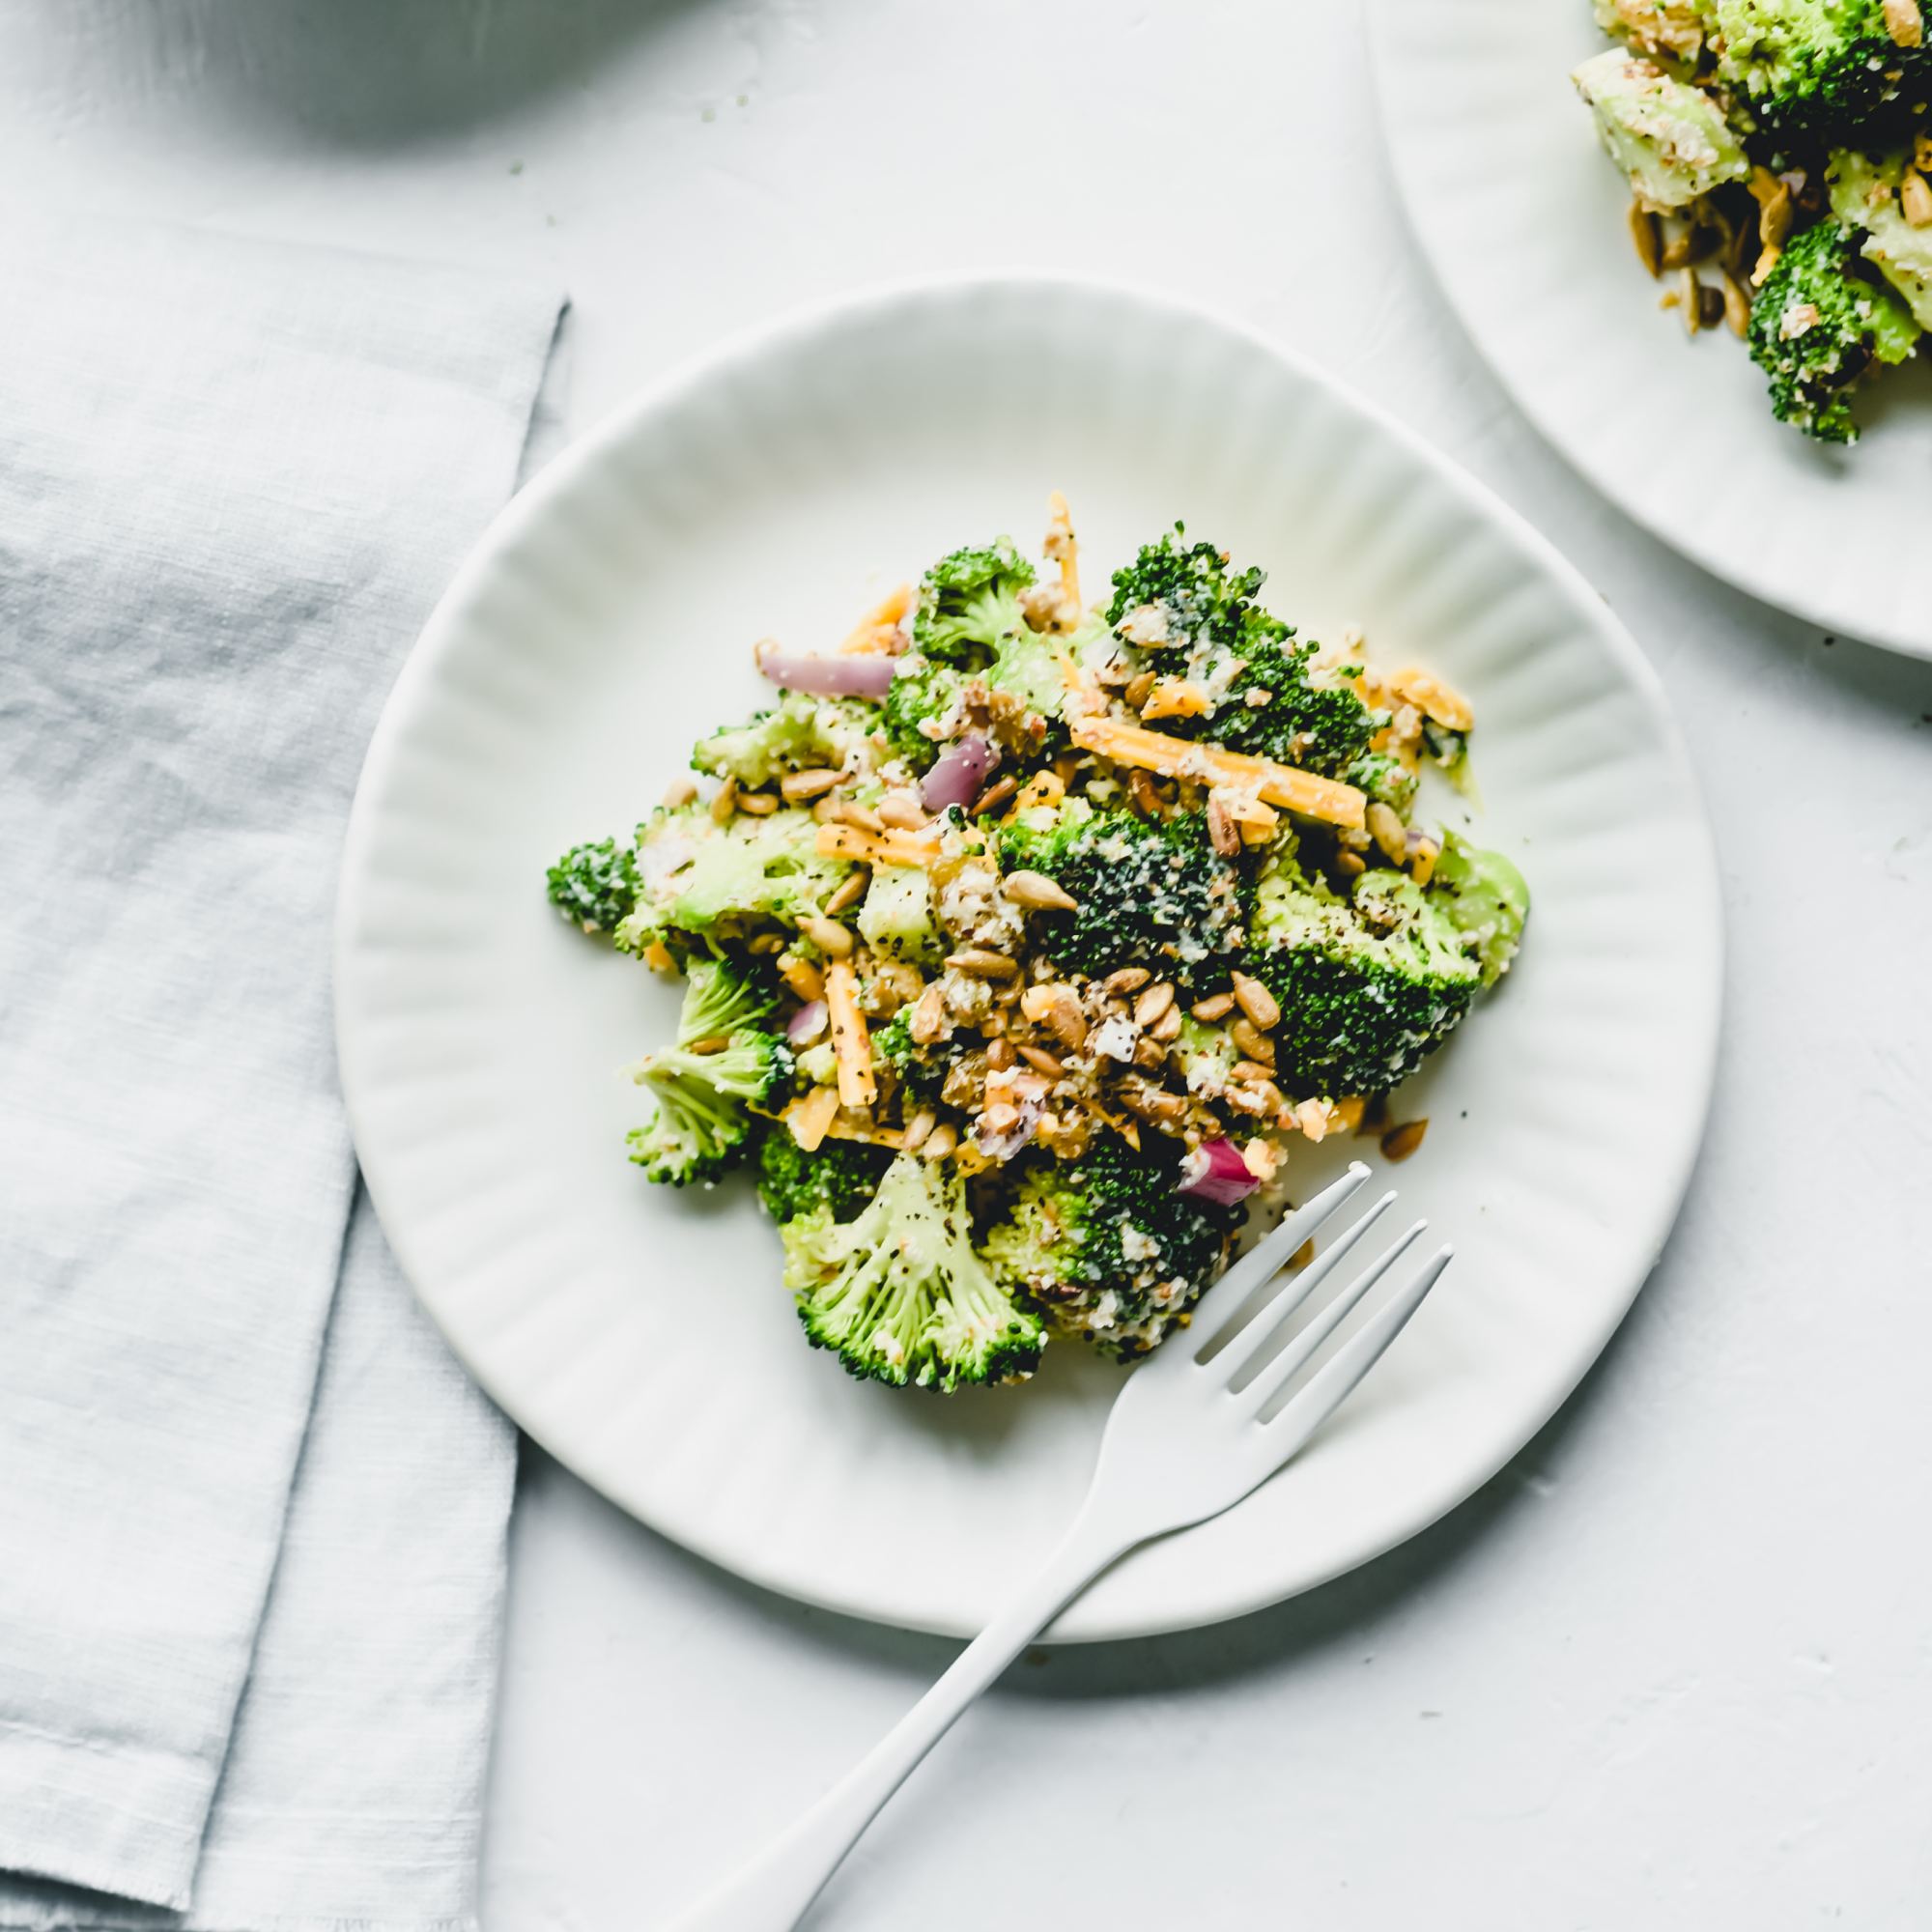 Vegan Broccoli salad with almond pulp recipe from Almond Cow